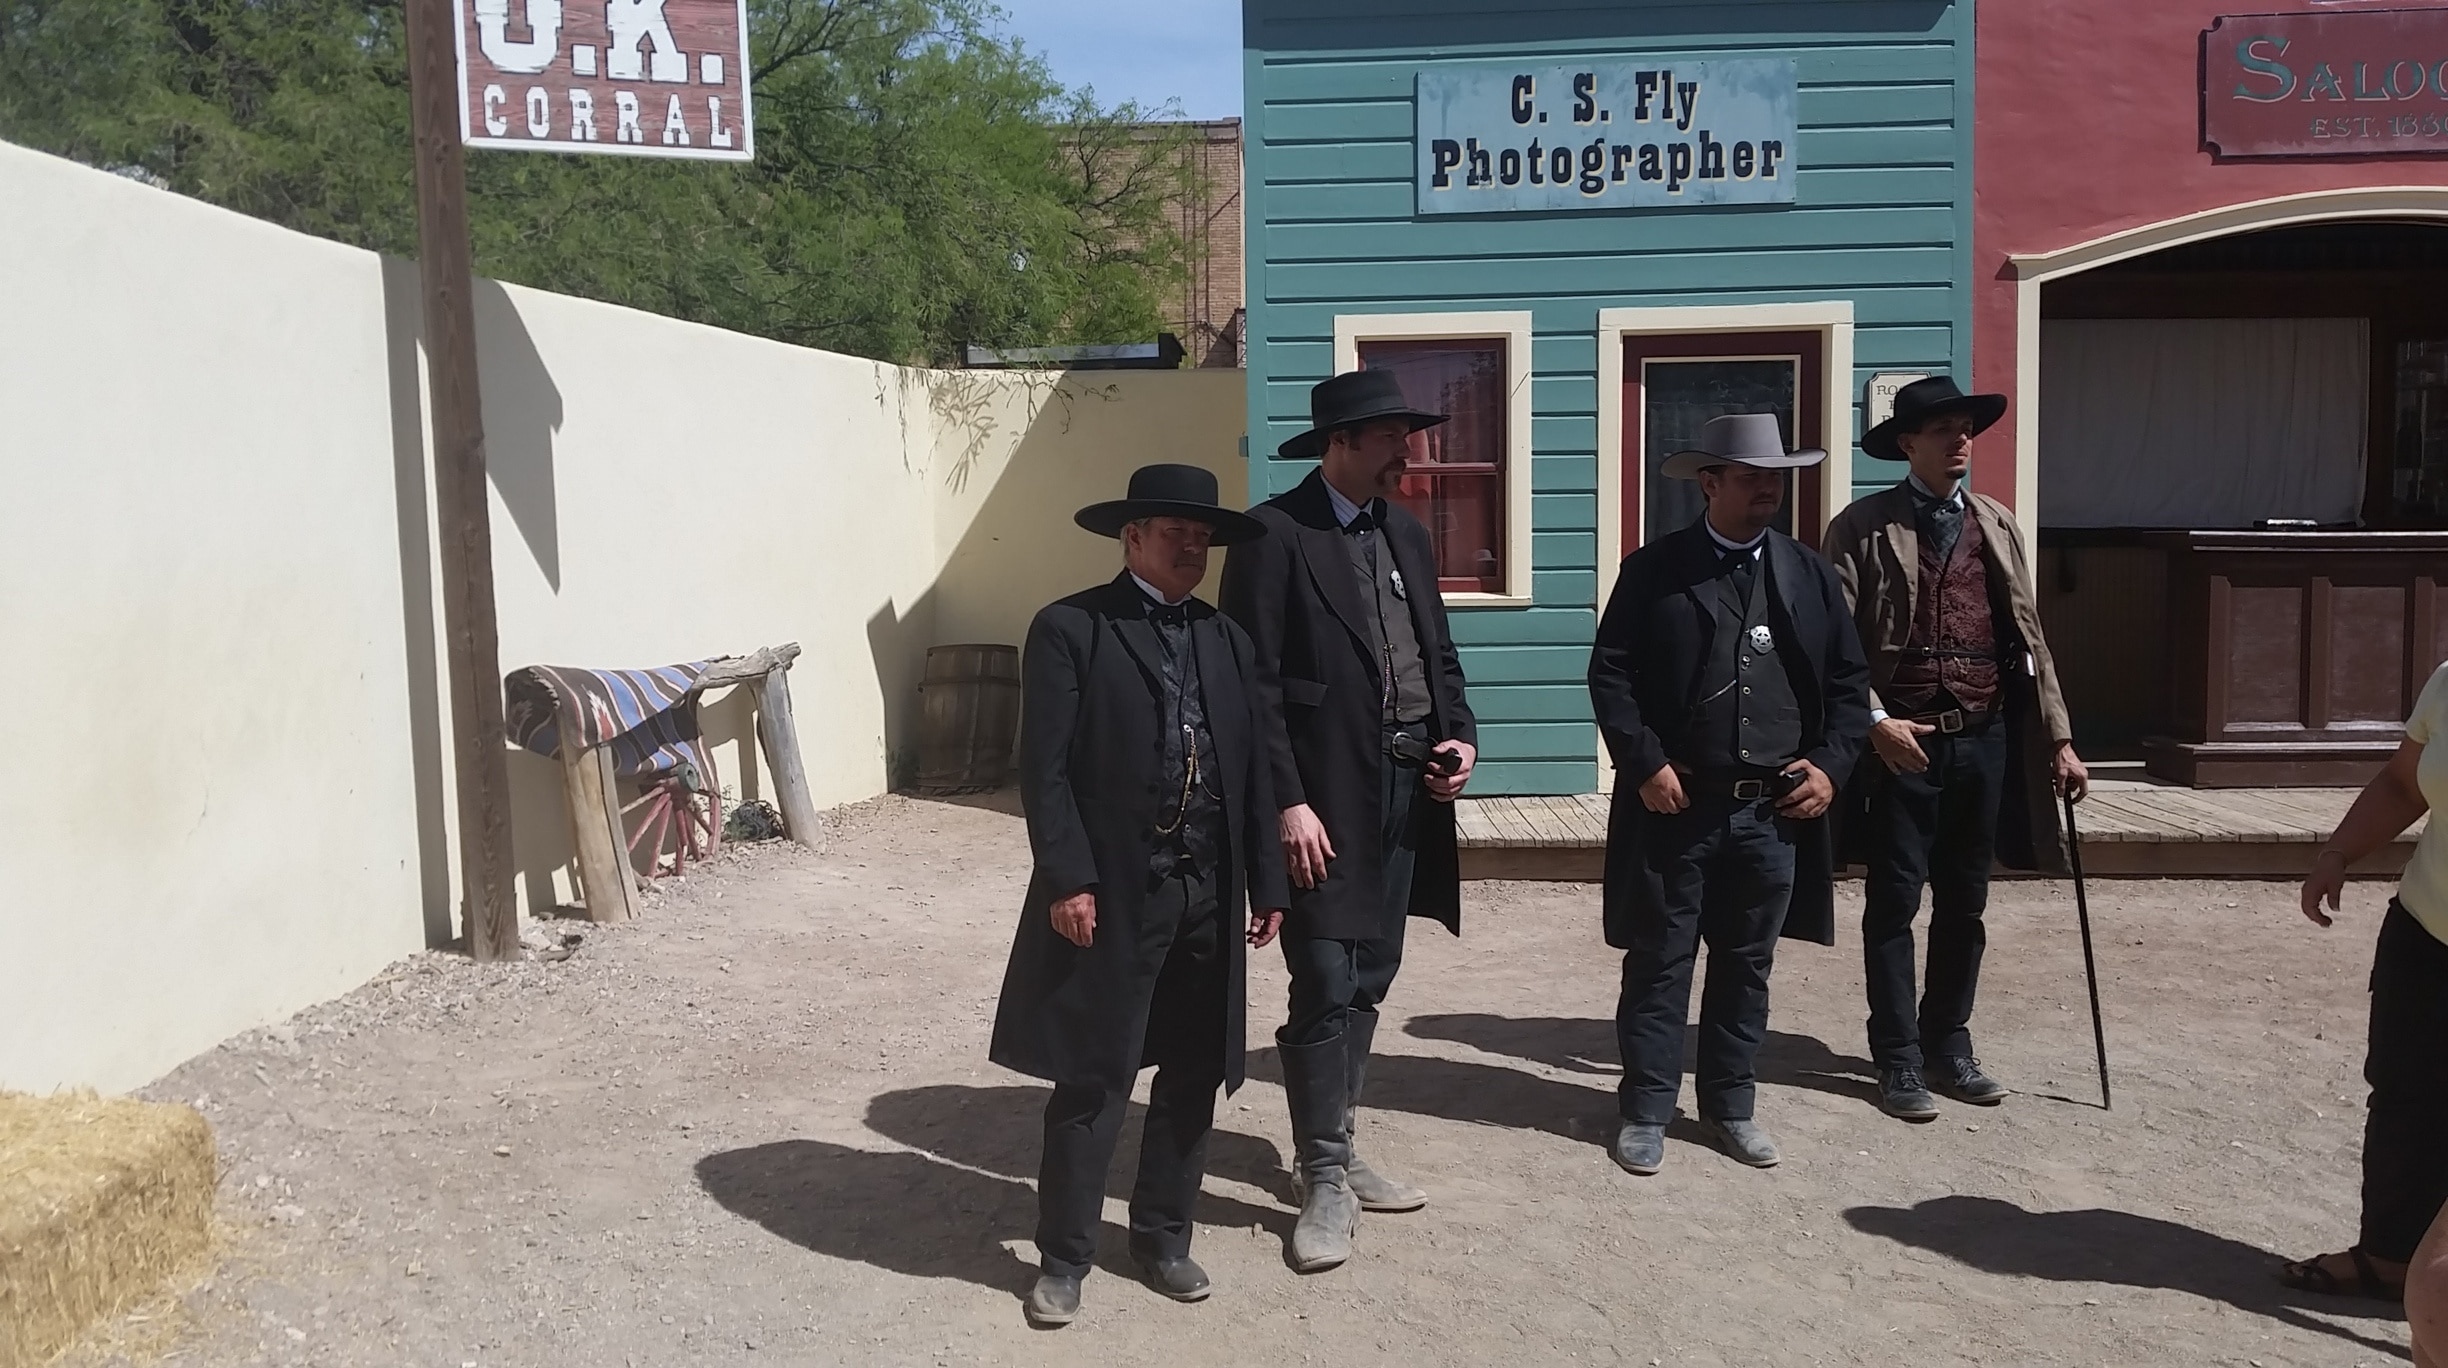 Gunslingers ruled the streets in Tombstone, Arizona, in the 1880s. Today, you can see the OK Corral reenactment show to relive the lawless days. 
#UStravel #UShistory #OldWest #wildwest #entertainment 